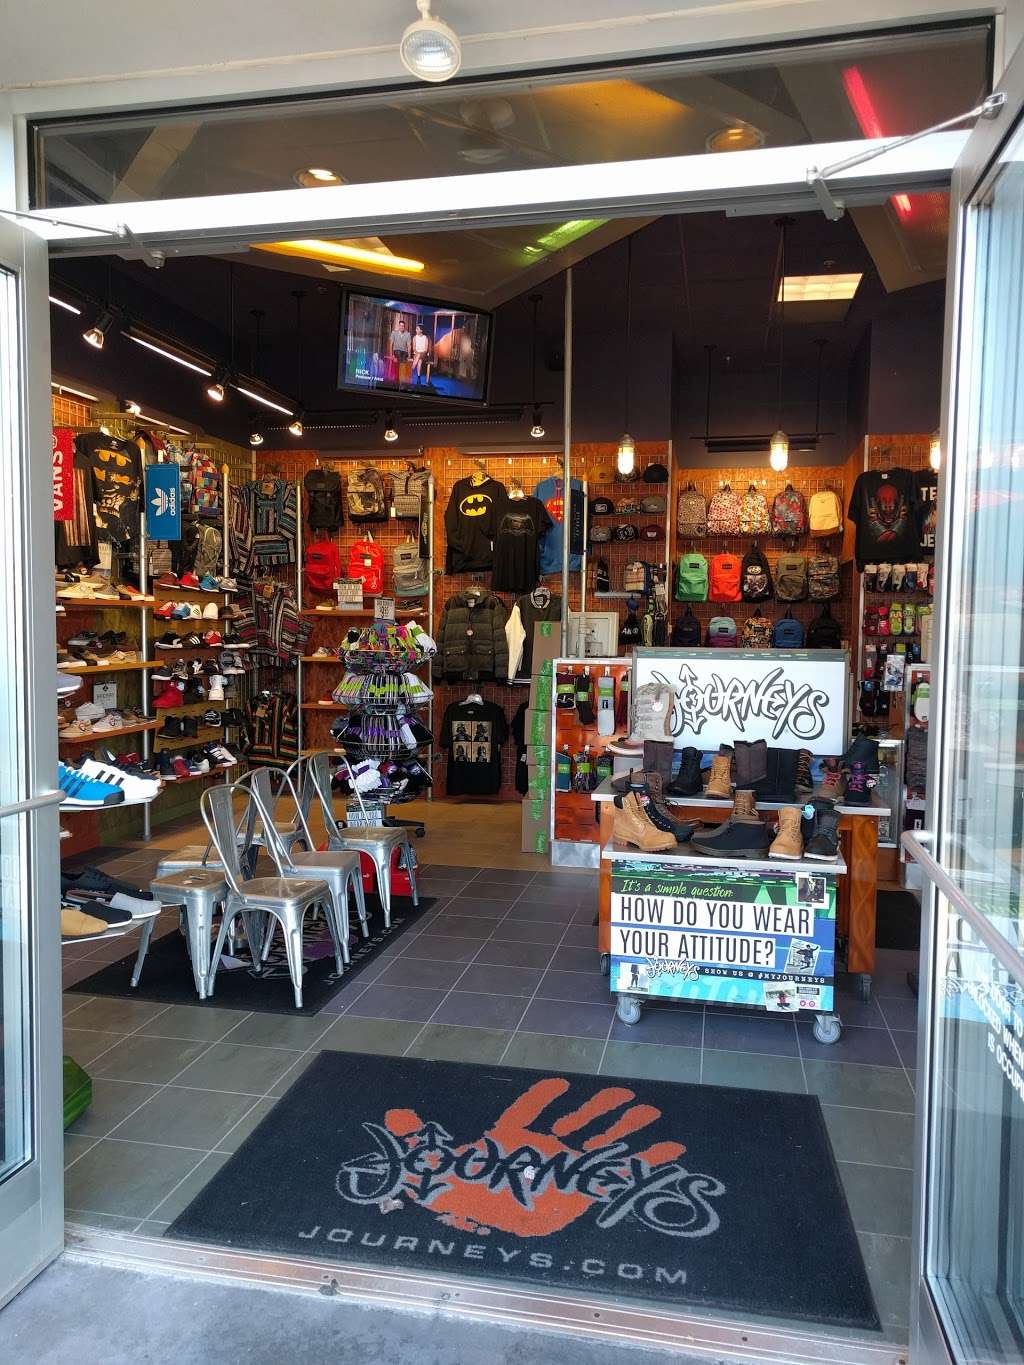 Journeys | Saucon Valley, 2805 Center Valley Pkwy #608, Center Valley, PA 18034 | Phone: (610) 798-0276